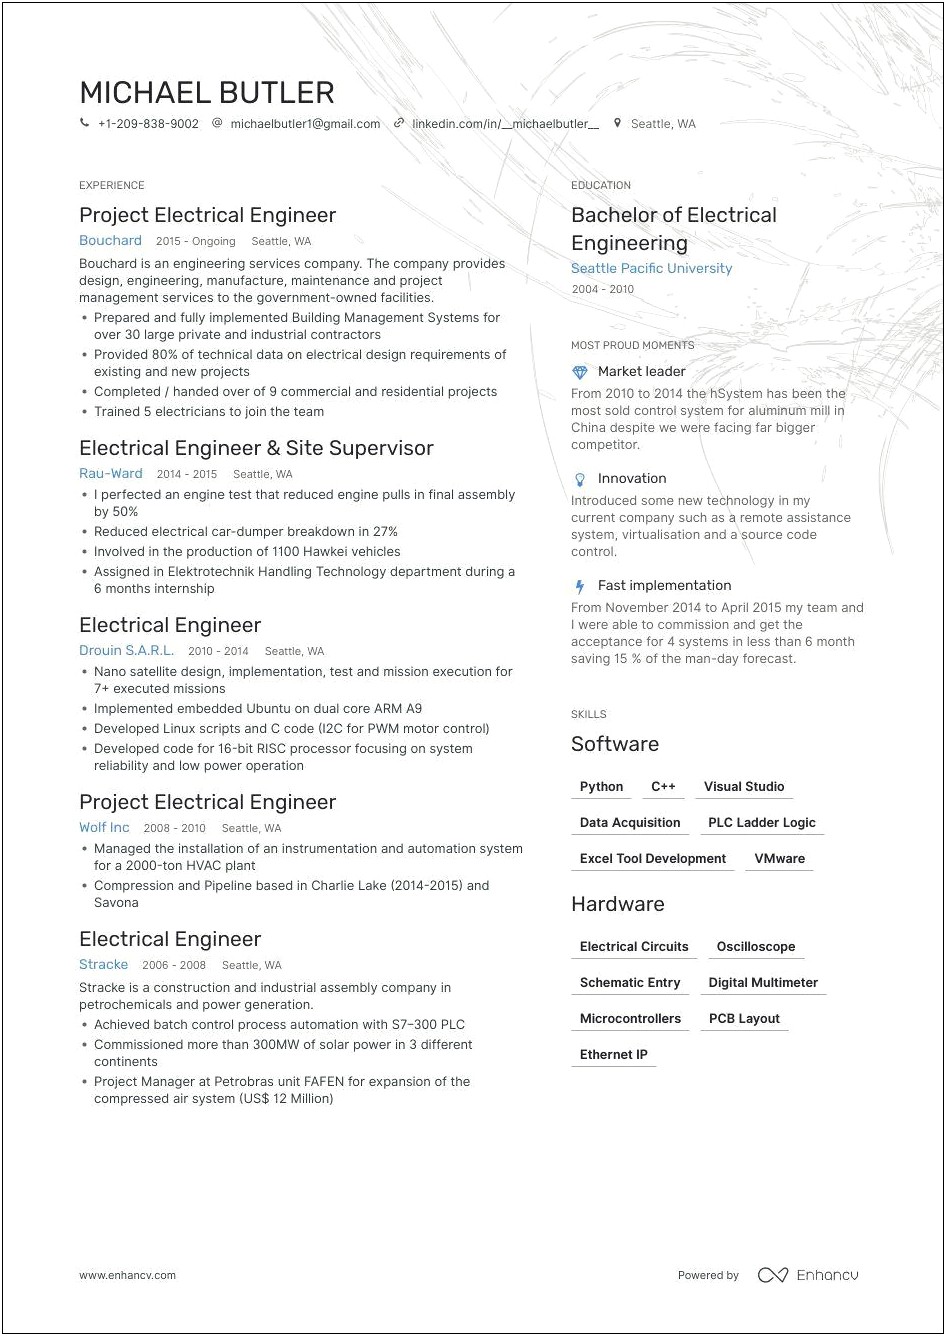 Sample Resume For Electrical Engineer In Construction Field